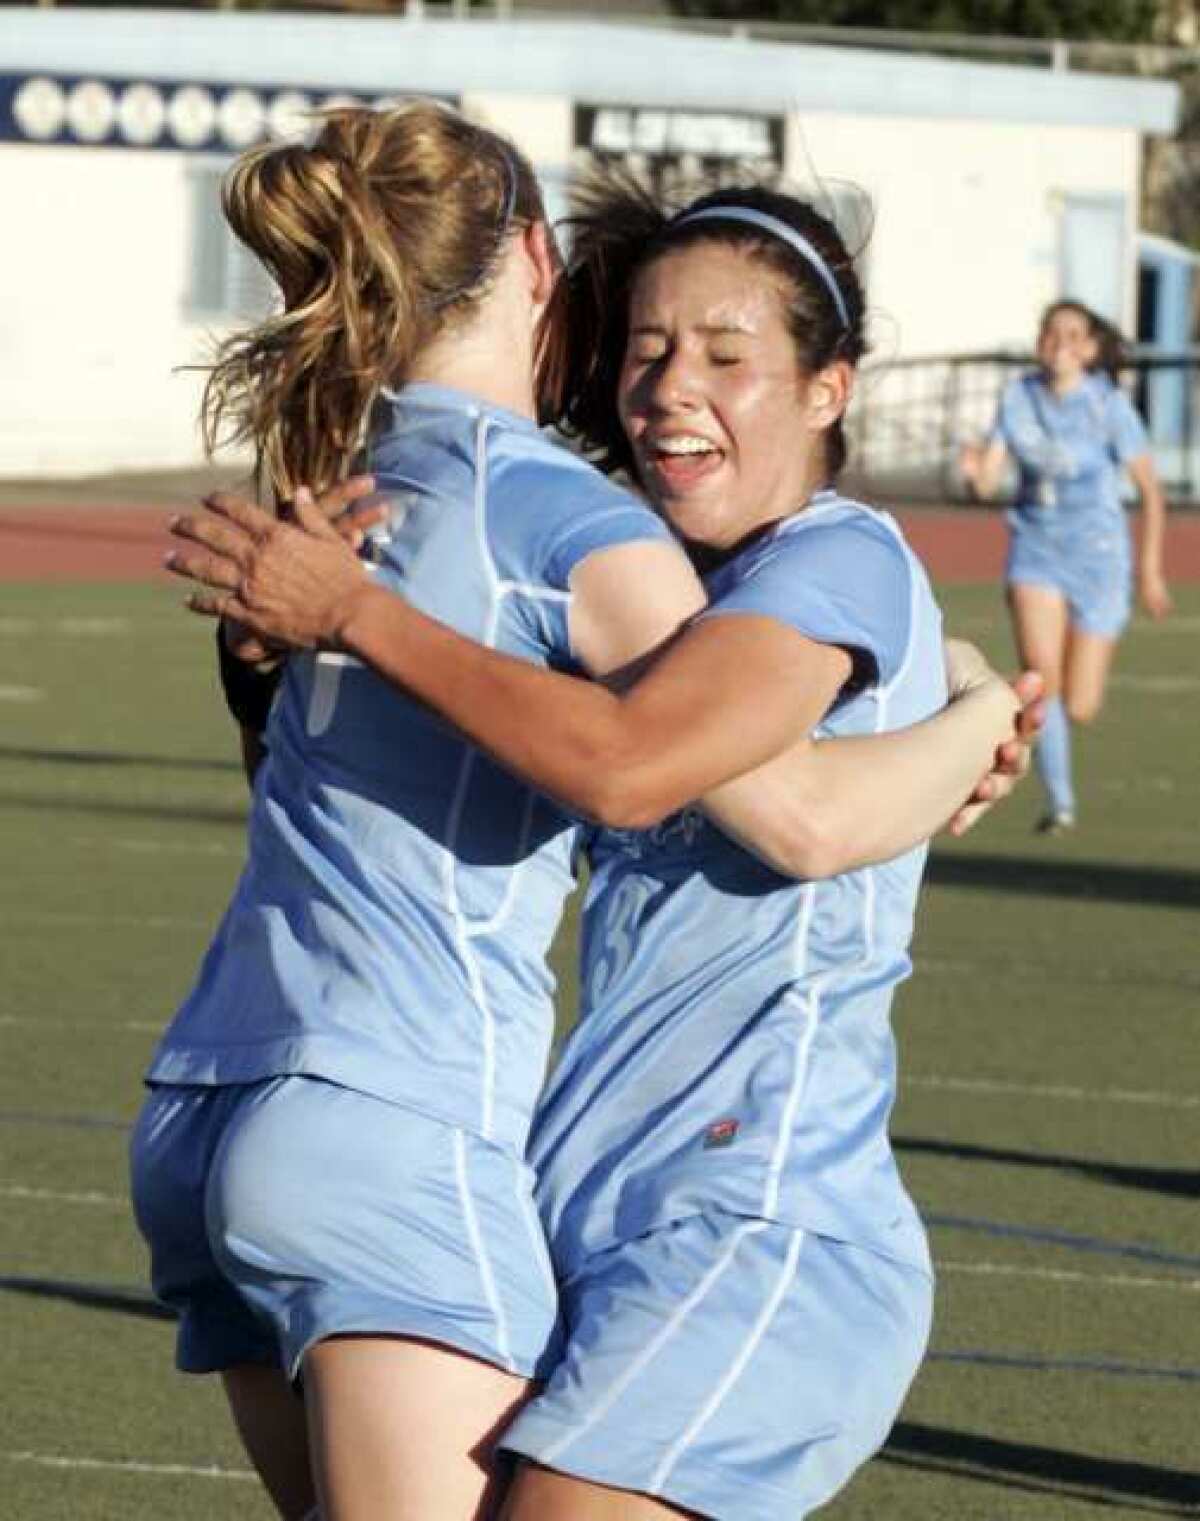 Crescenta Valley's Jacque Phinney, right, hugs to congratulate Sierra Rhoads who just scored a goal late in the second half against Arcadia in a Pacific League girls soccer match at Crescenta Valley High School in La Crescenta on Thursday, February 9, 2012. For four seasons, the Crescenta Valley High girls' soccer trio of Sierra Rhoads, Whitley Boller and Katie Callister plied their trade in helping and eventually leading the Falcons to Pacific League success and a pair of playoff wins.